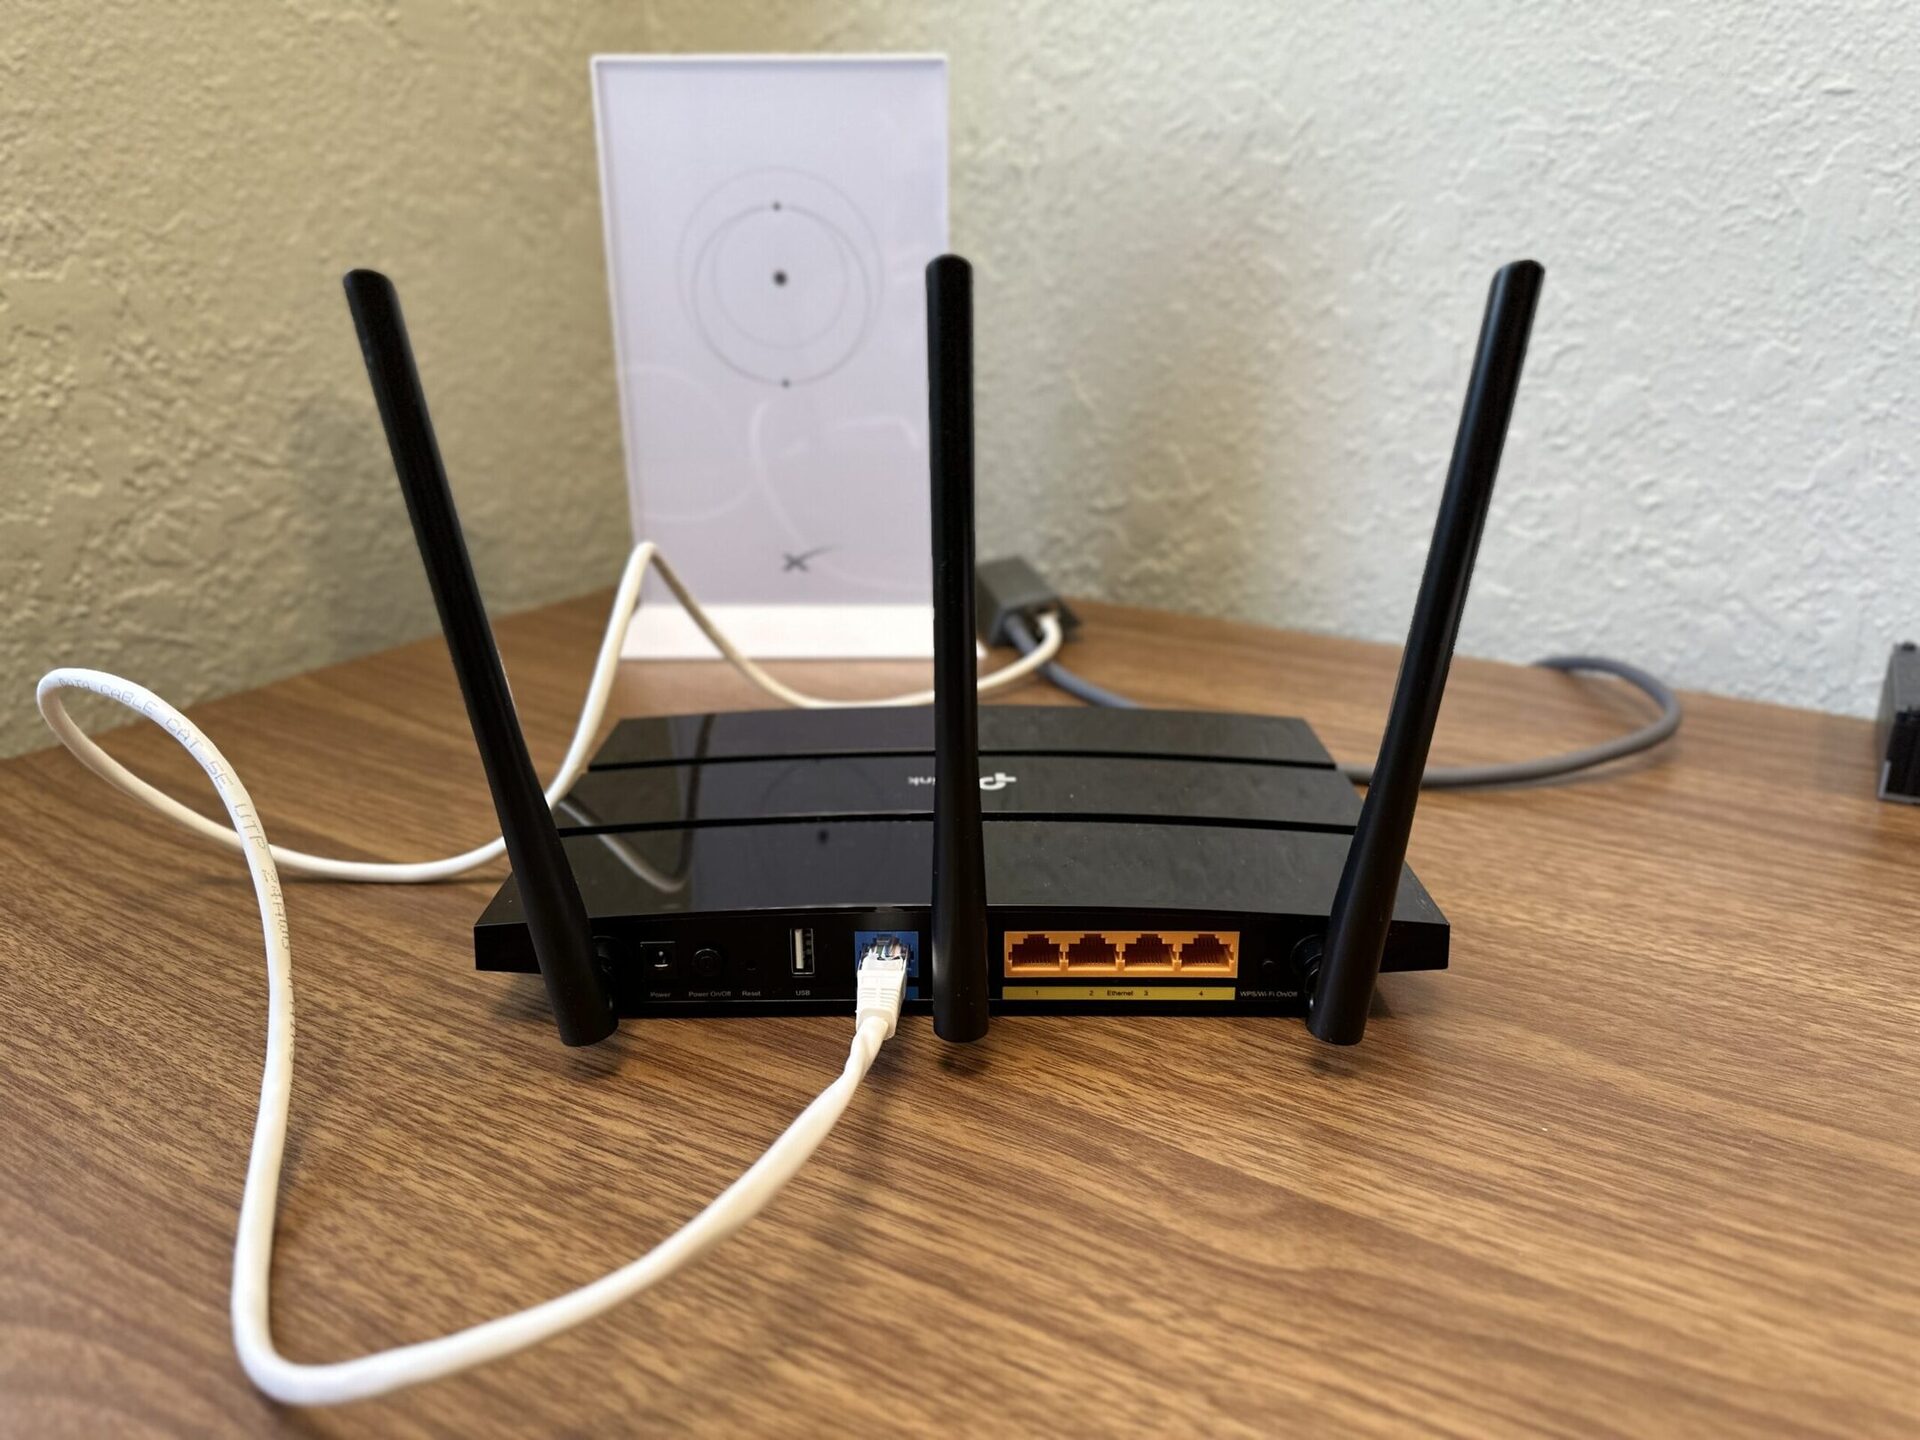 How To Connect A Wi-Fi Router To A Modem